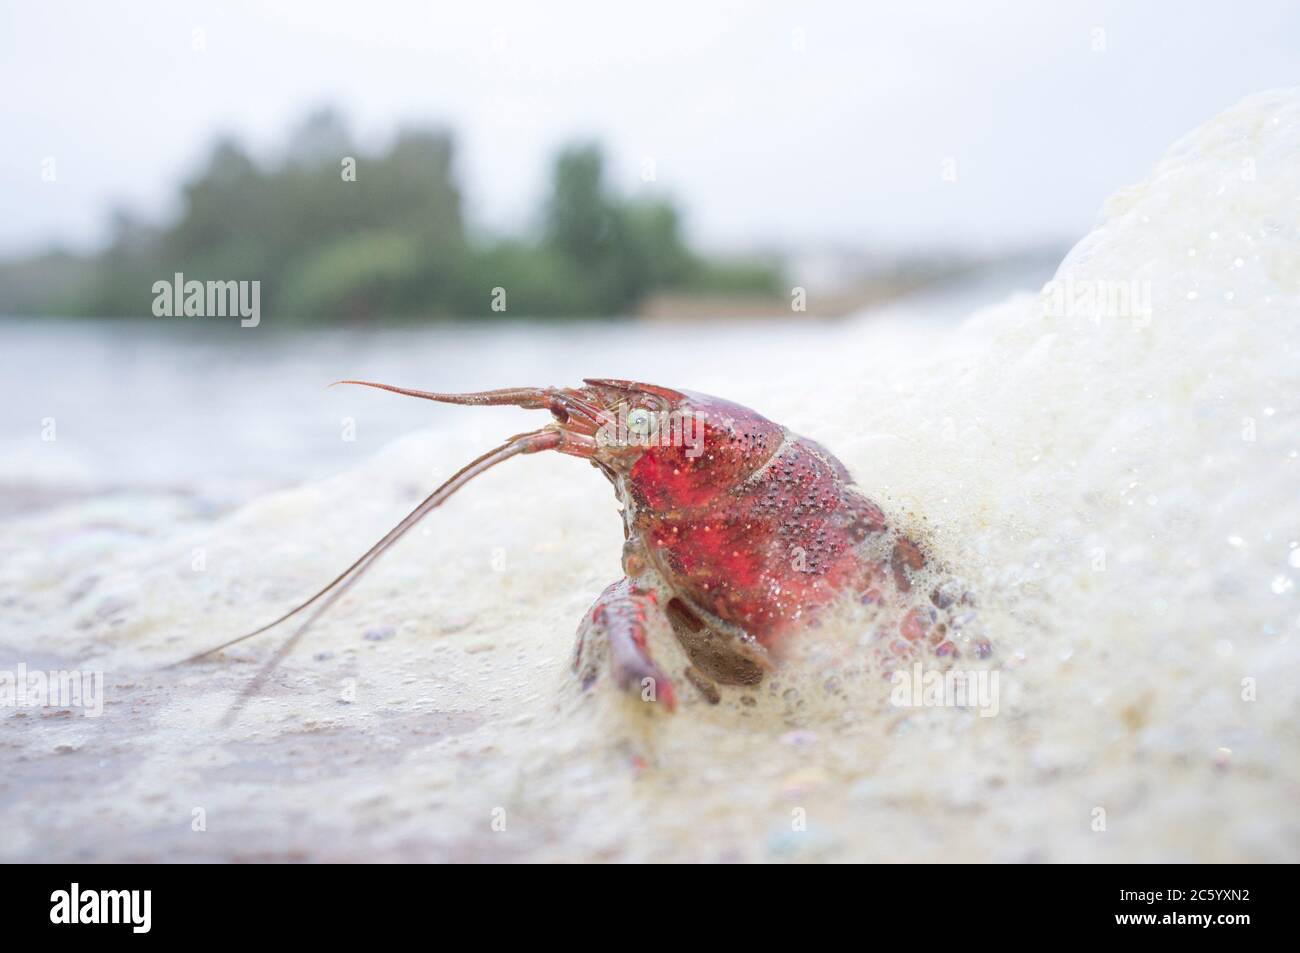 Crawfish full of foam at polluted river. Selective focus. Stock Photo